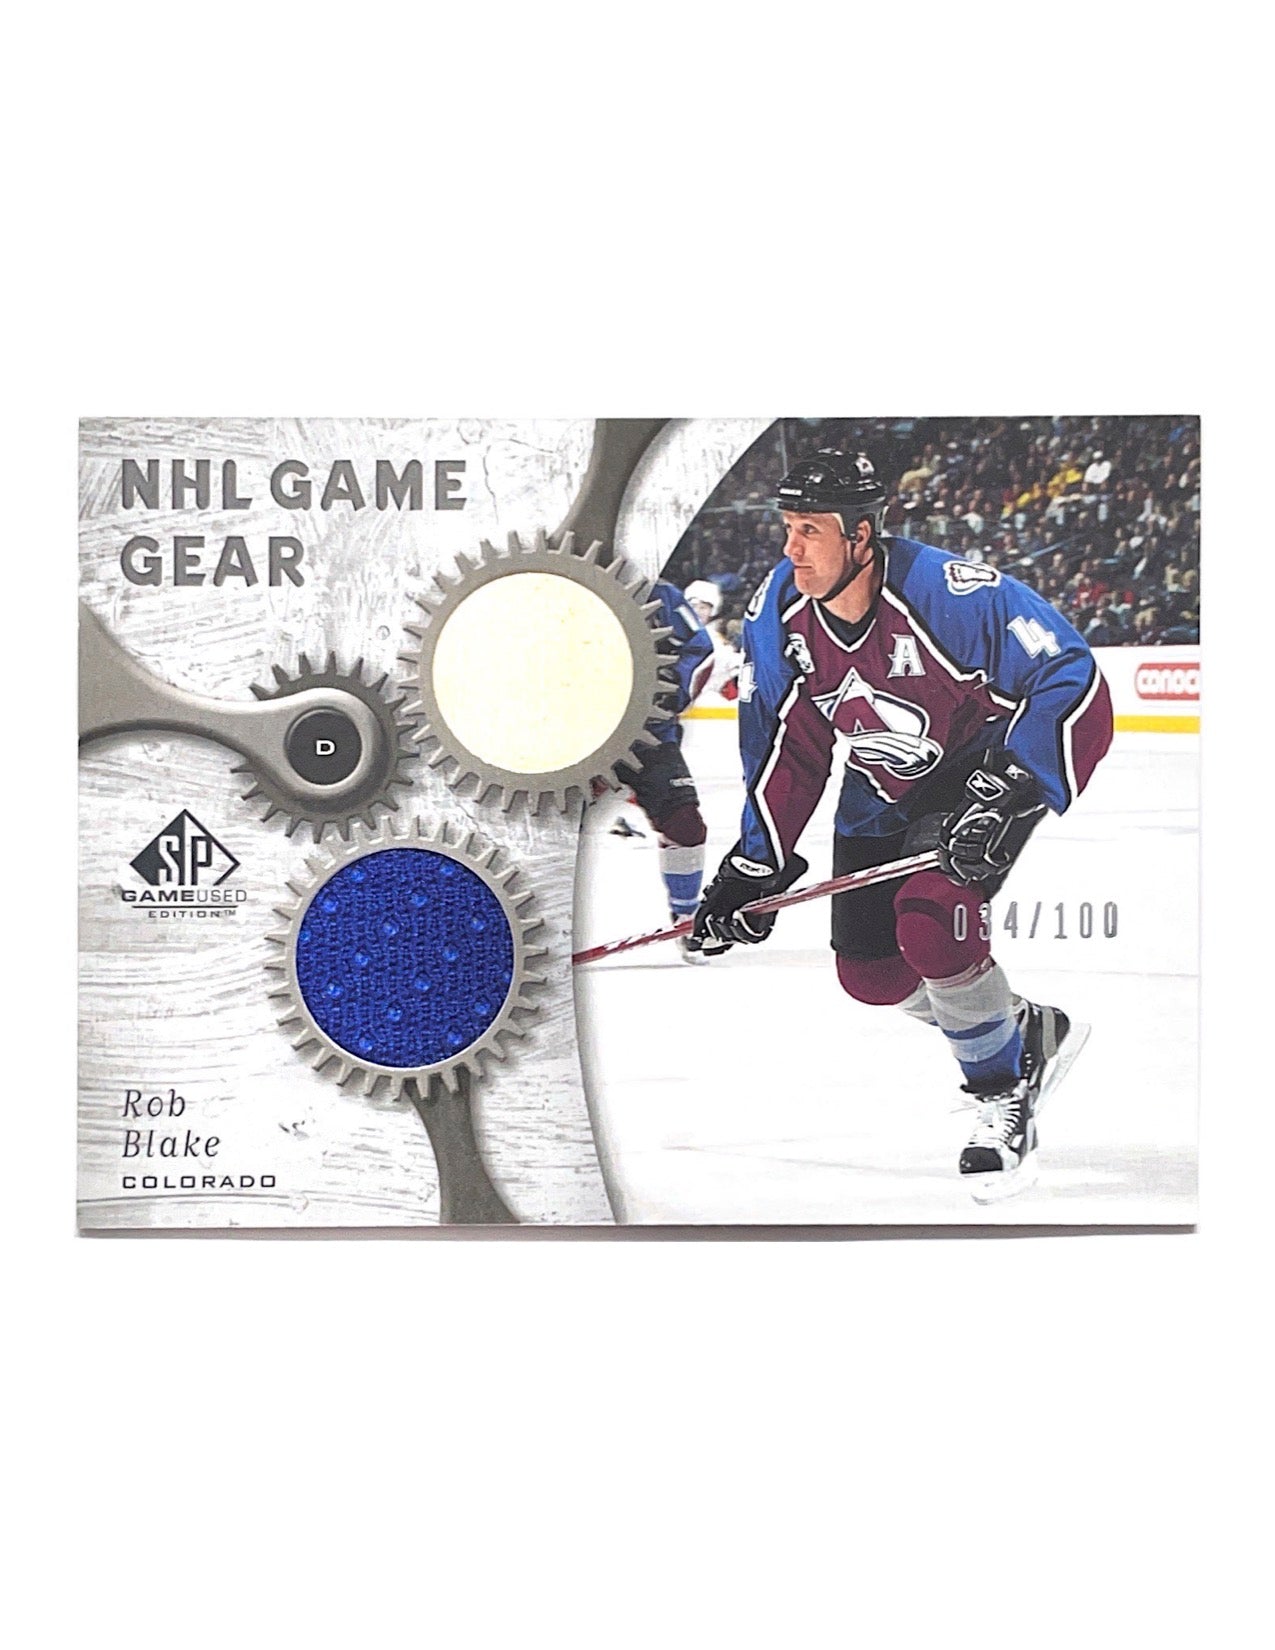 Rob Blake 2005-06 Upper Deck SP Game Used NHL Game Gear Jersey Stick #GG-BL - 034/100